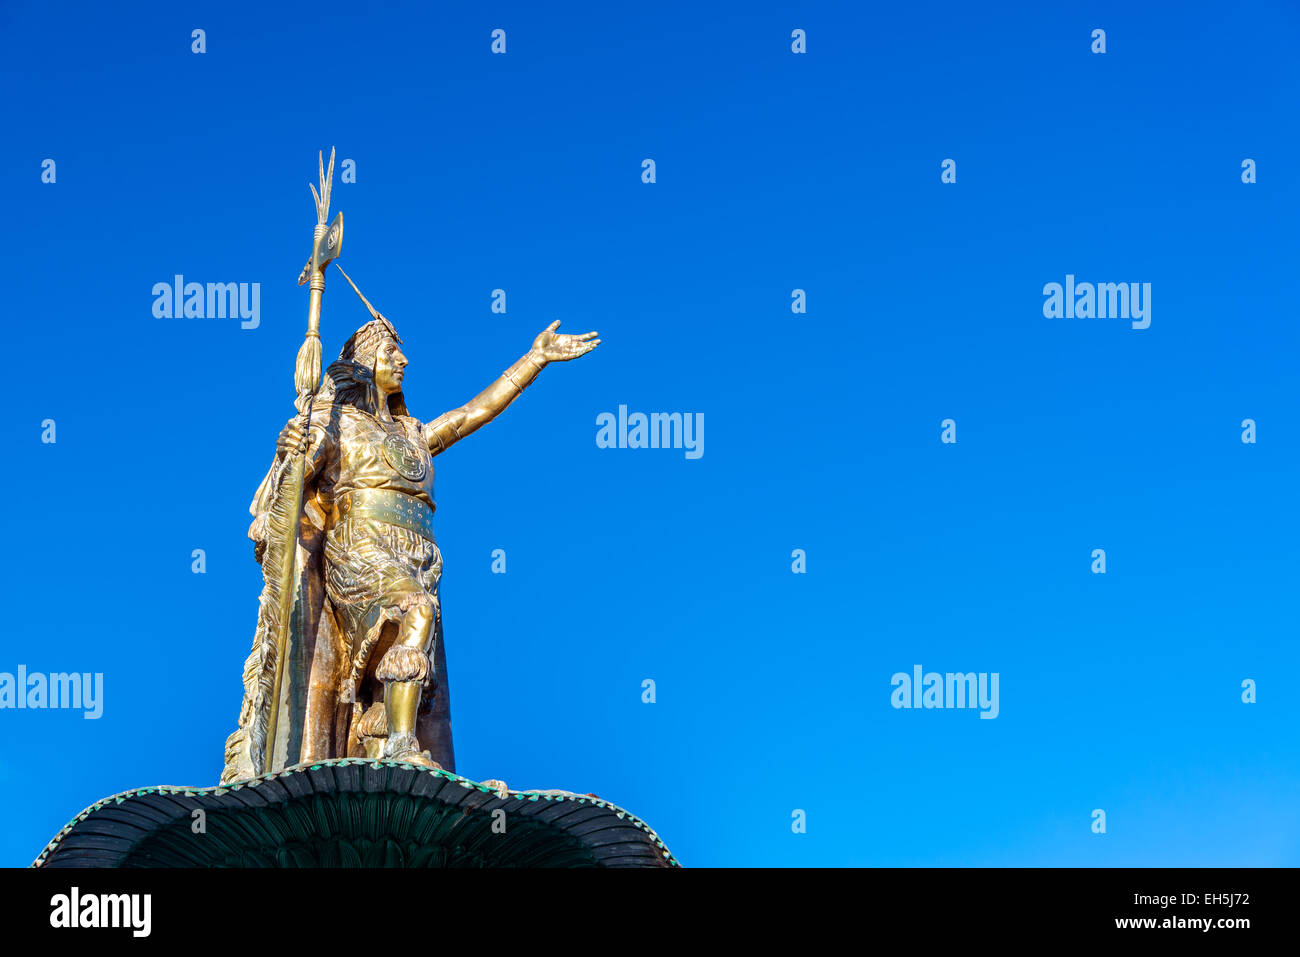 Fountain in the form of an Incan ruler in the Plaza de Armas in the historic center of Cuzco, Peru Stock Photo